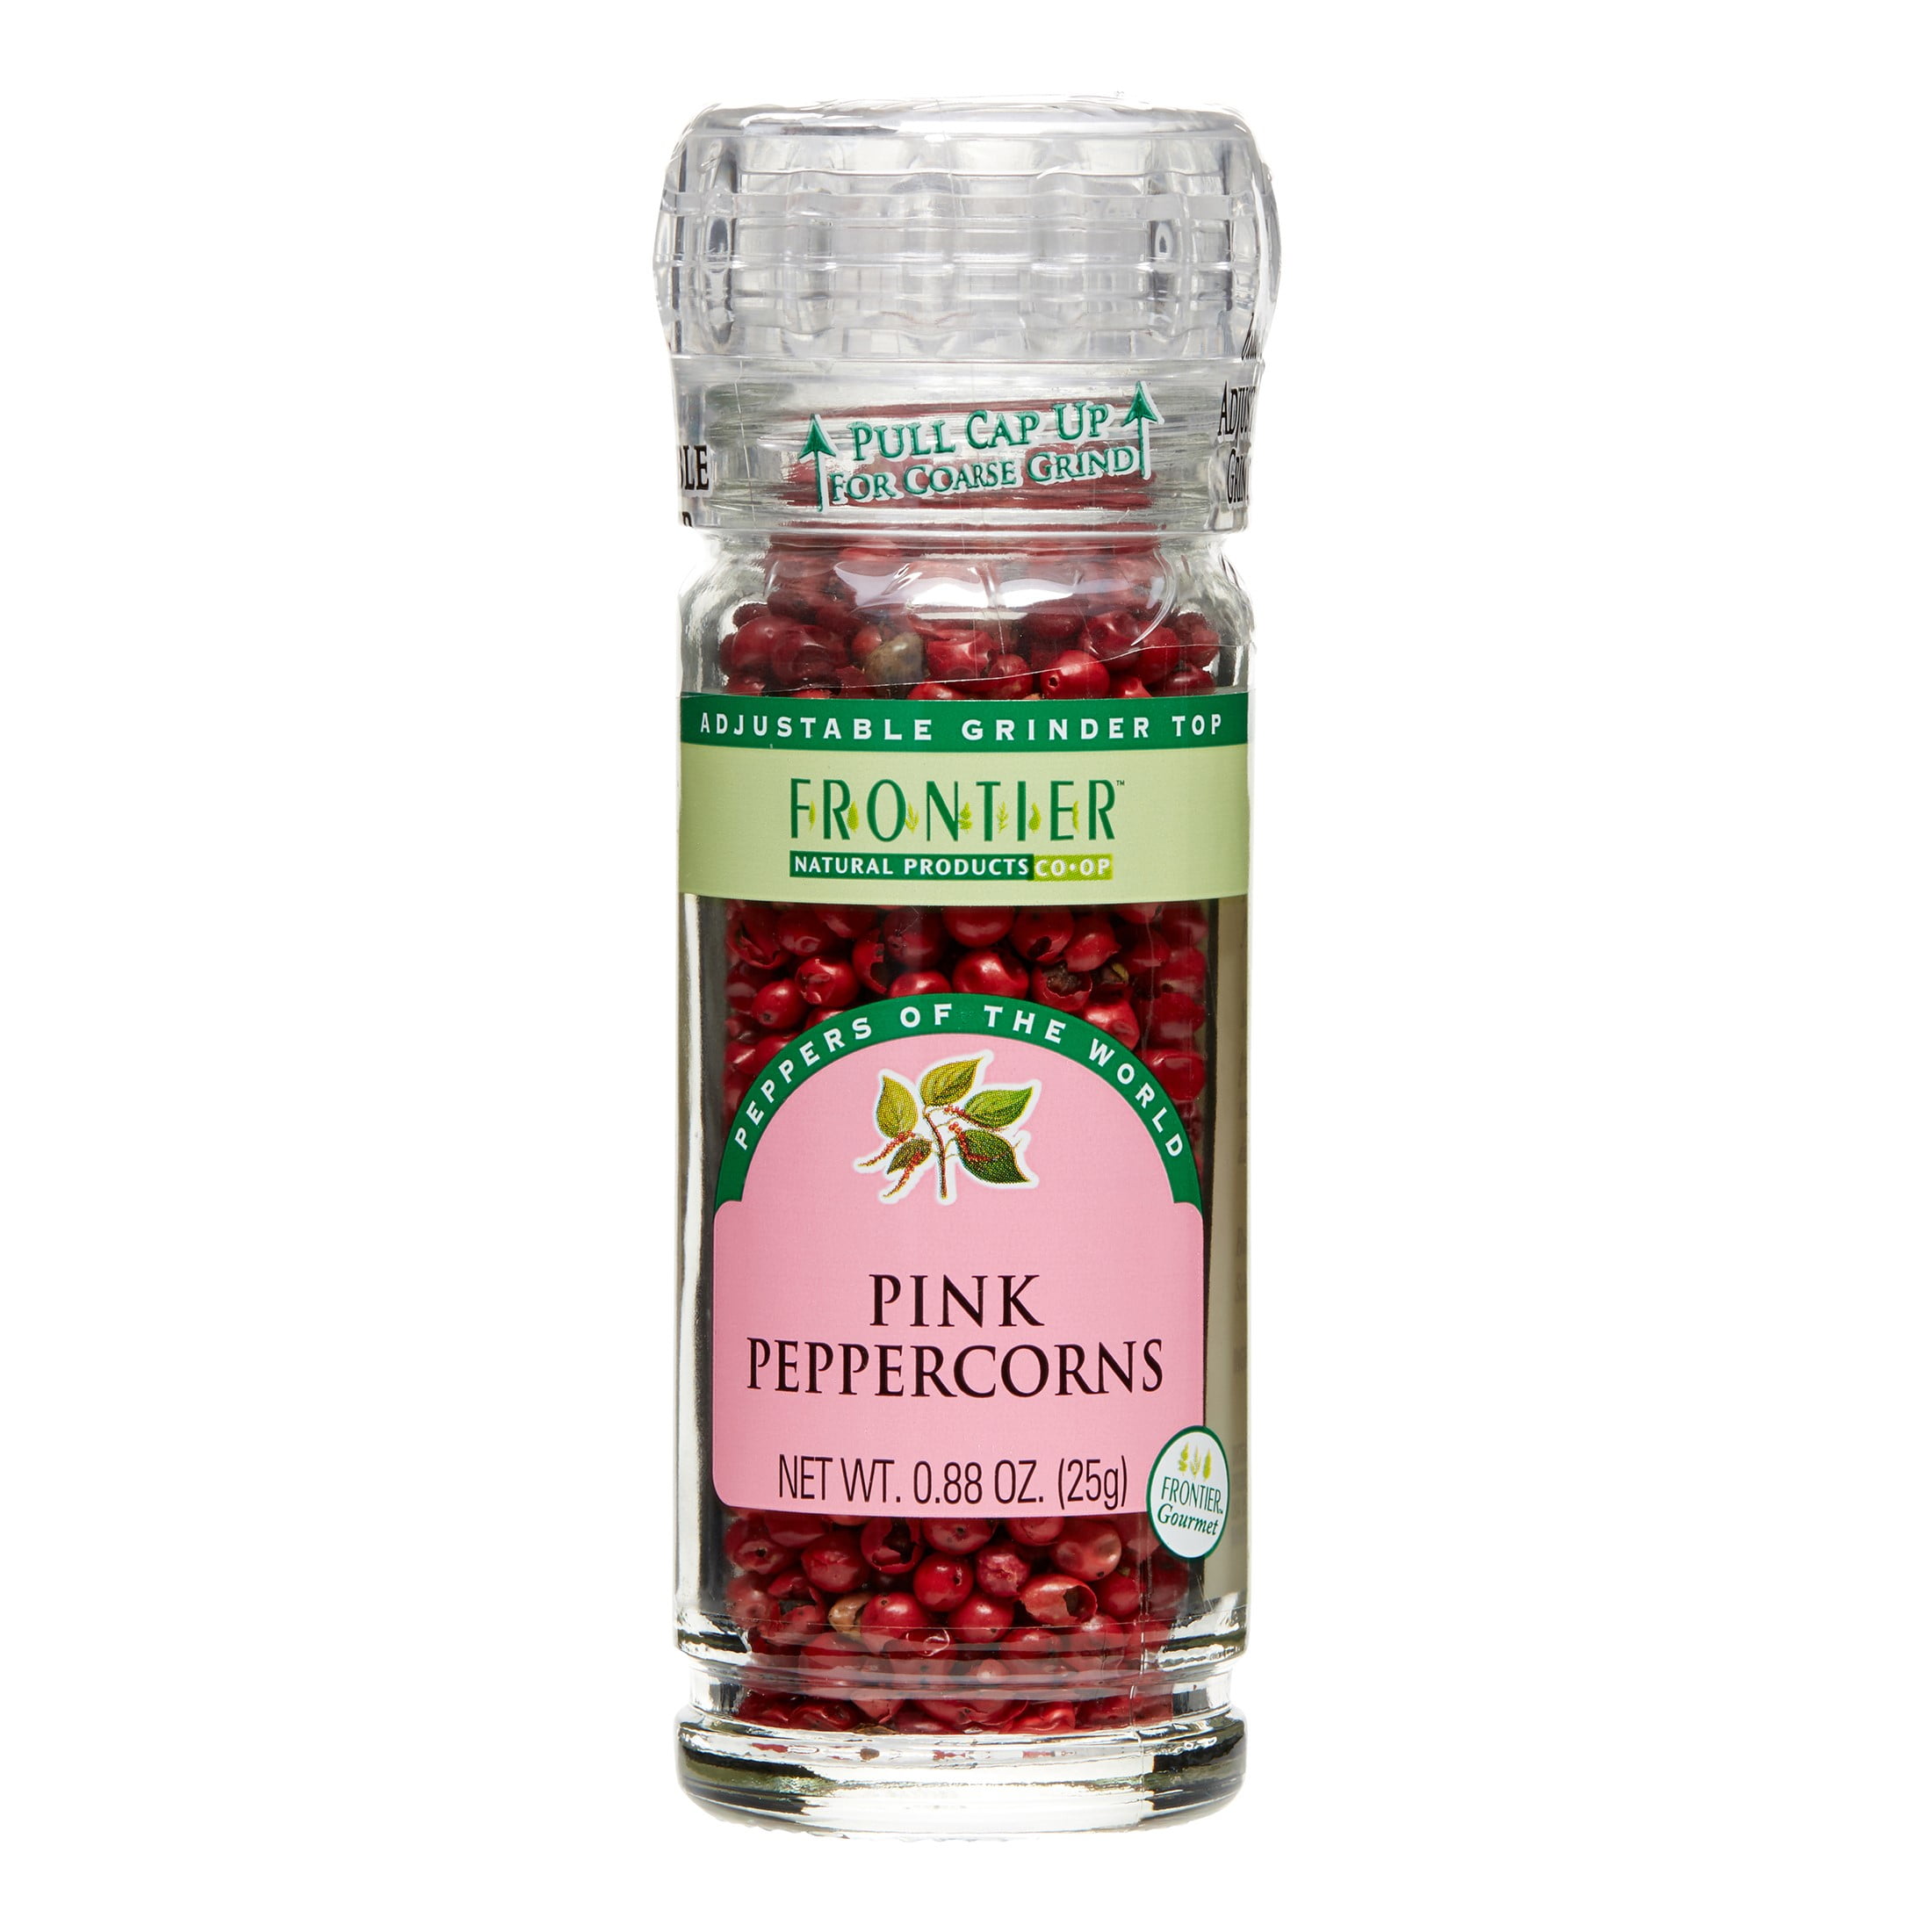 Discover Solutions: Pink Pepper